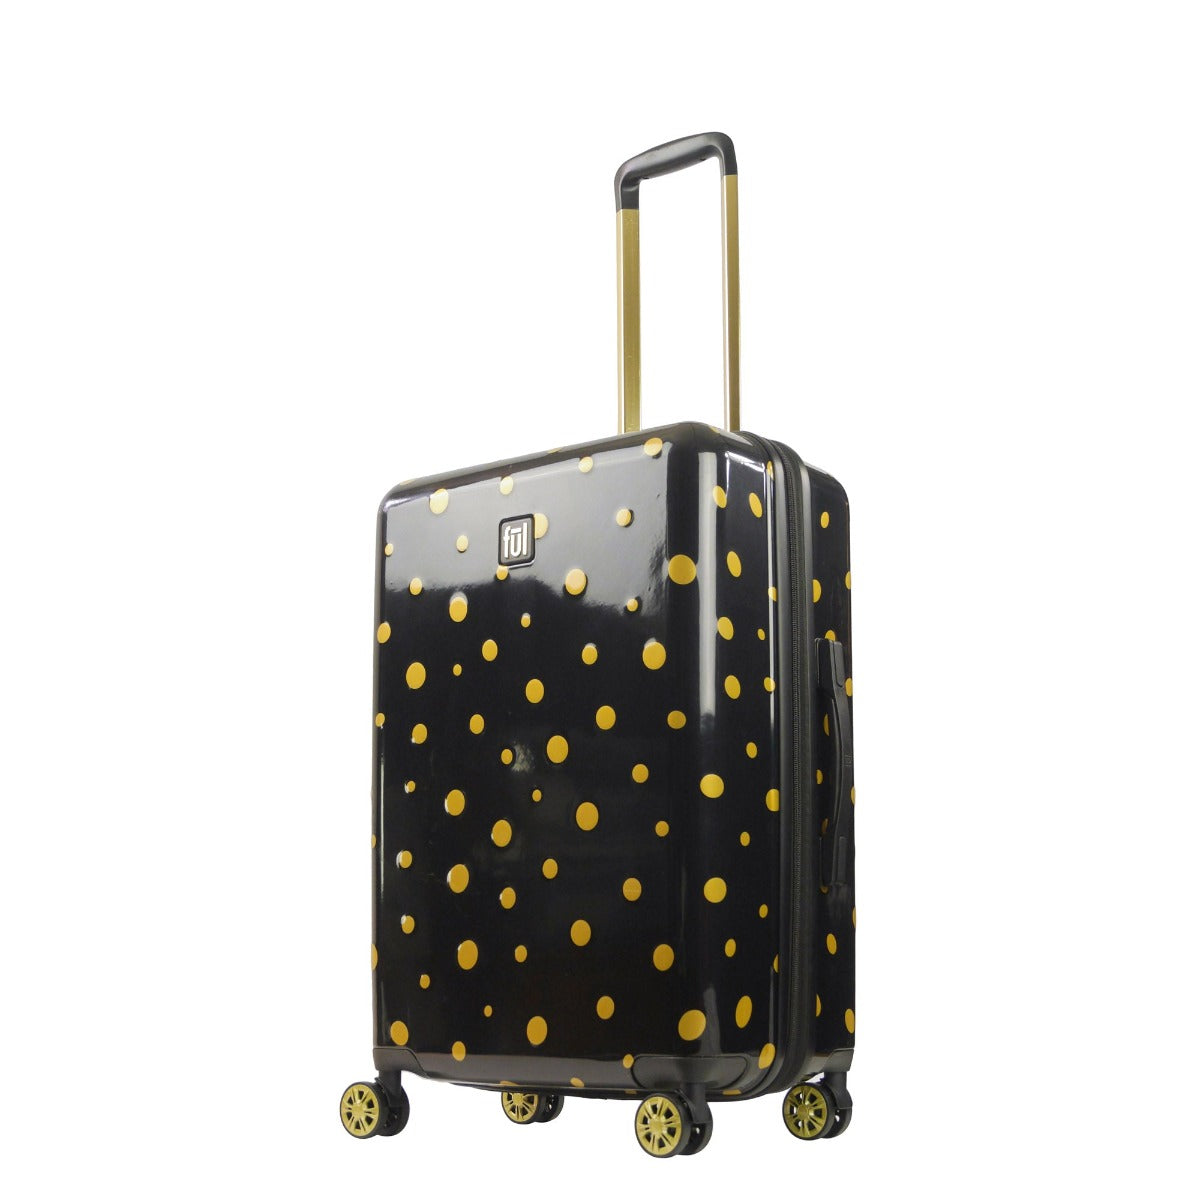 Ful Impulse Mixed Dots hardside spinner 26" checked luggage black gold suitcase